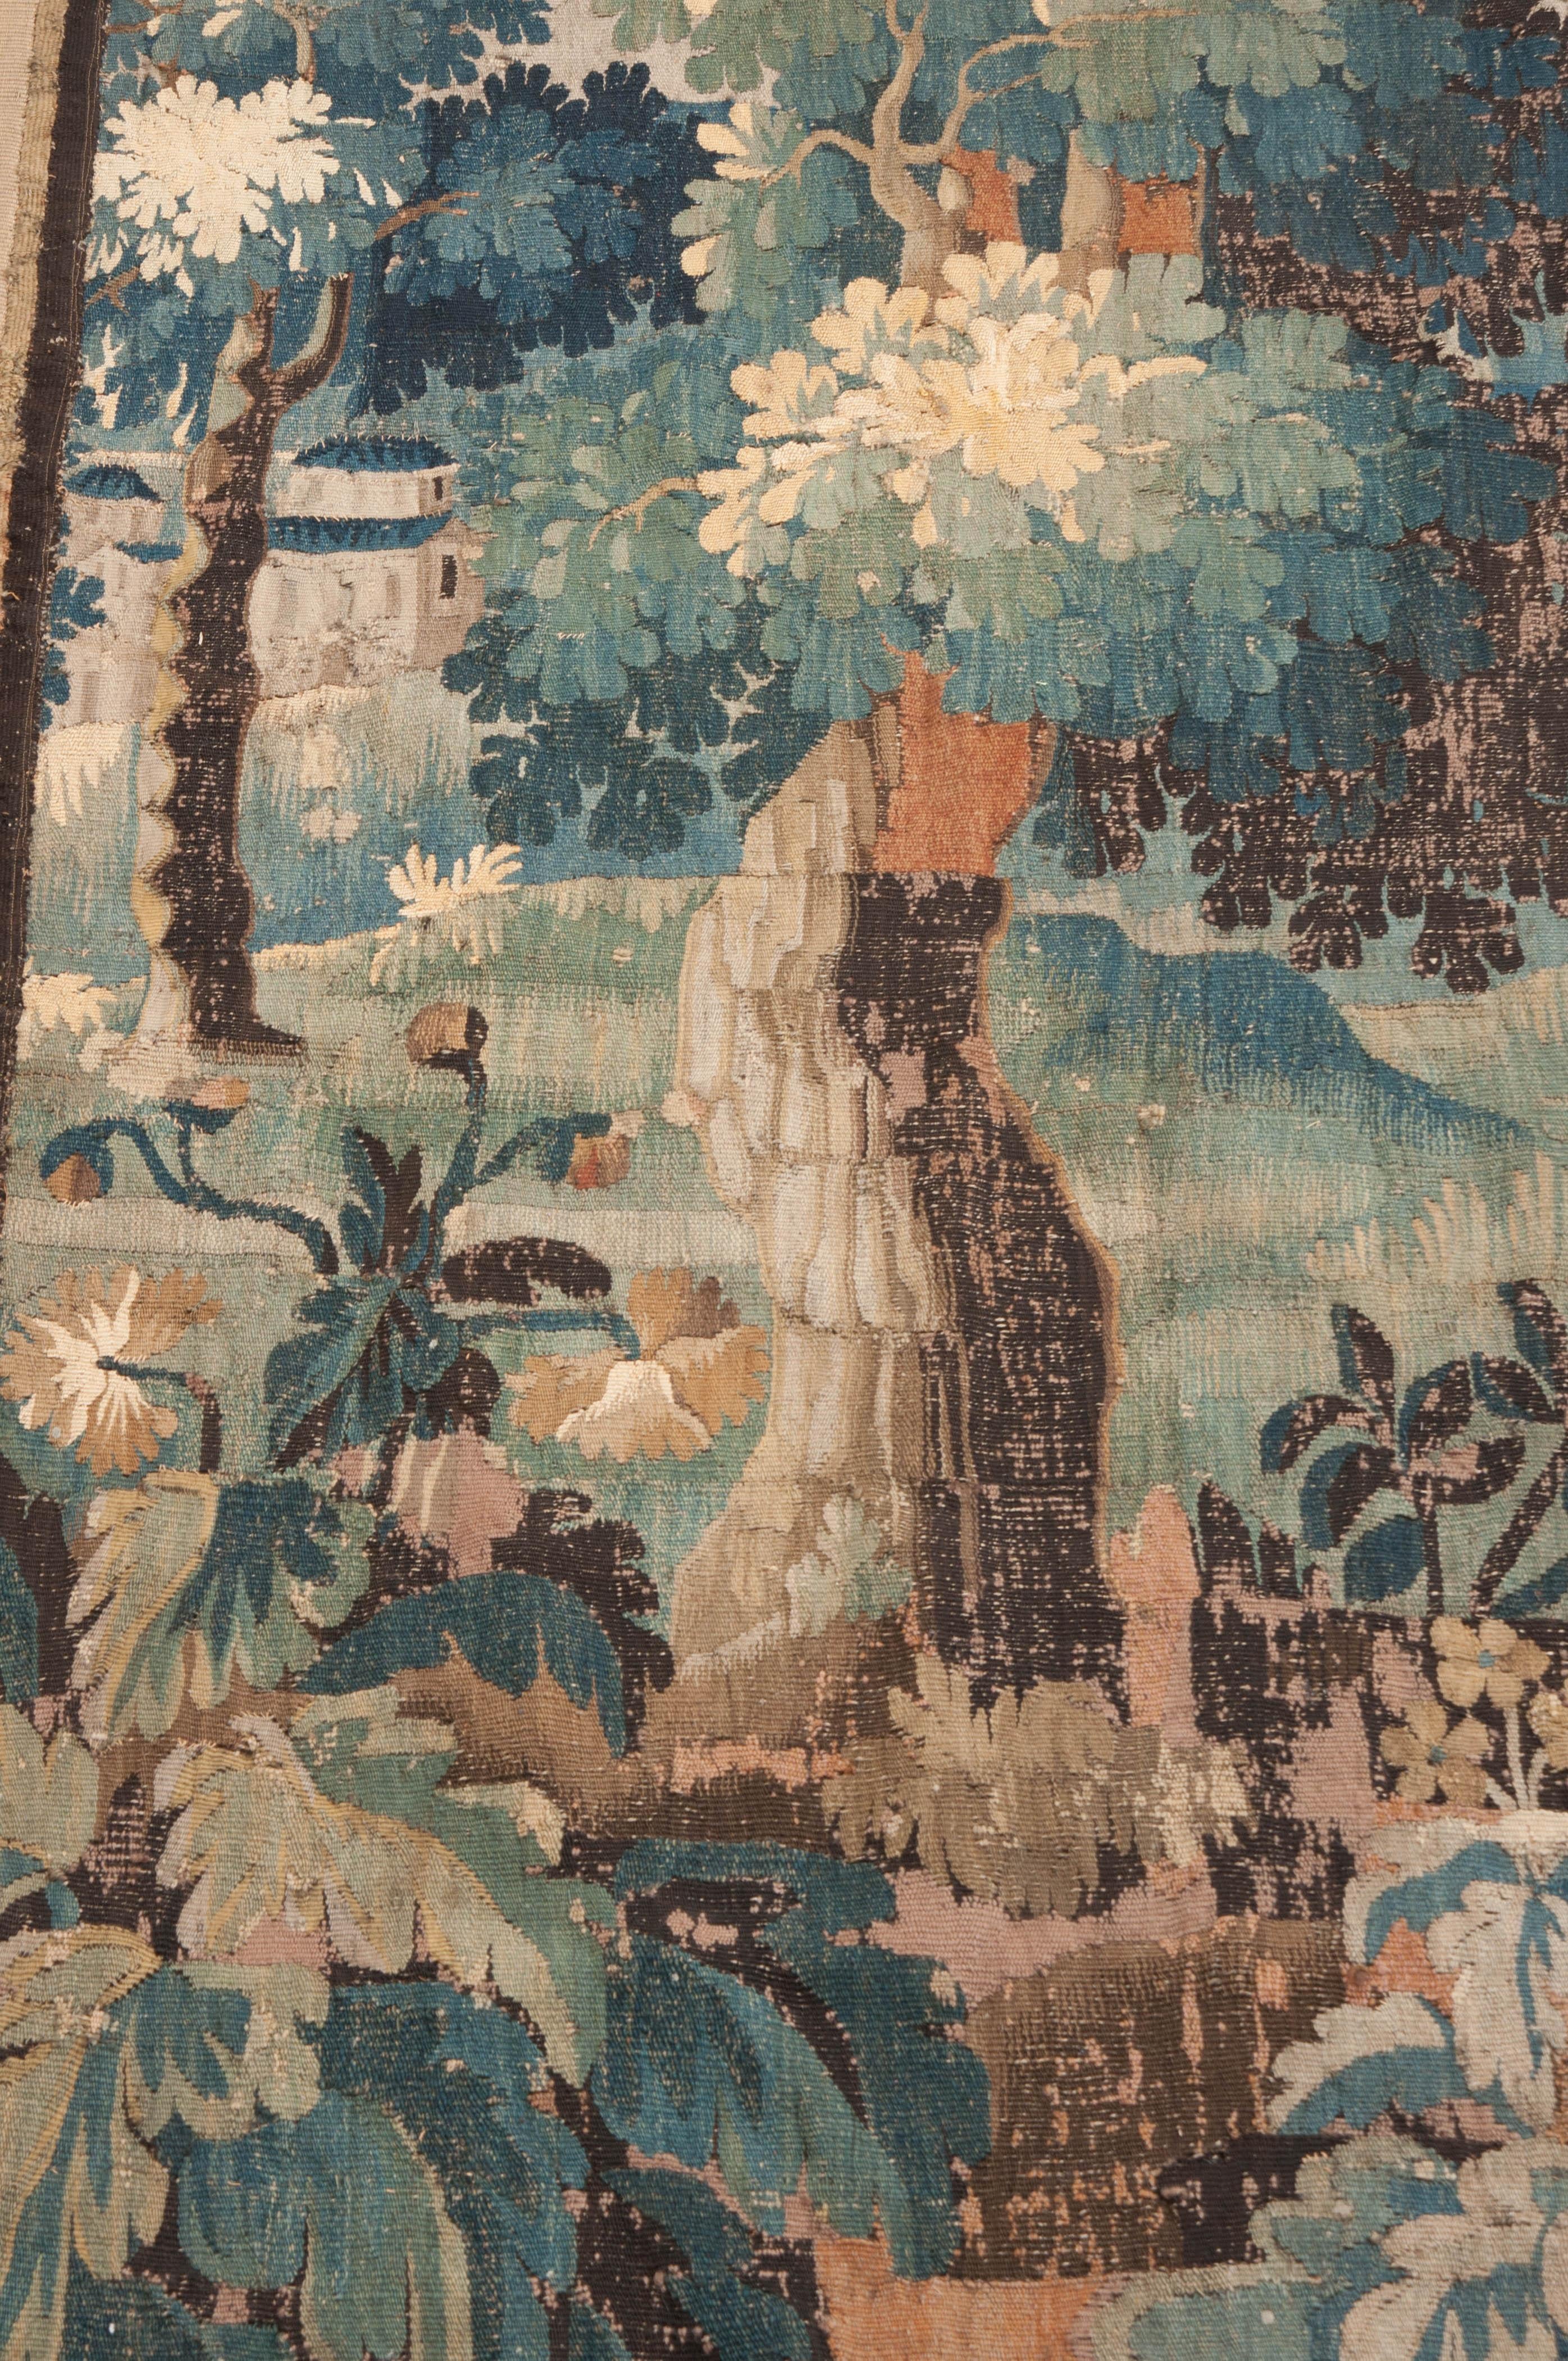 This gorgeous wool tapestry, circa 1750, is from Belgium and features a forest landscape with verdant trees and shrubbery, and having floral and foliate horizontal borders and striped vertical borders which accent its height. Time has been kind to